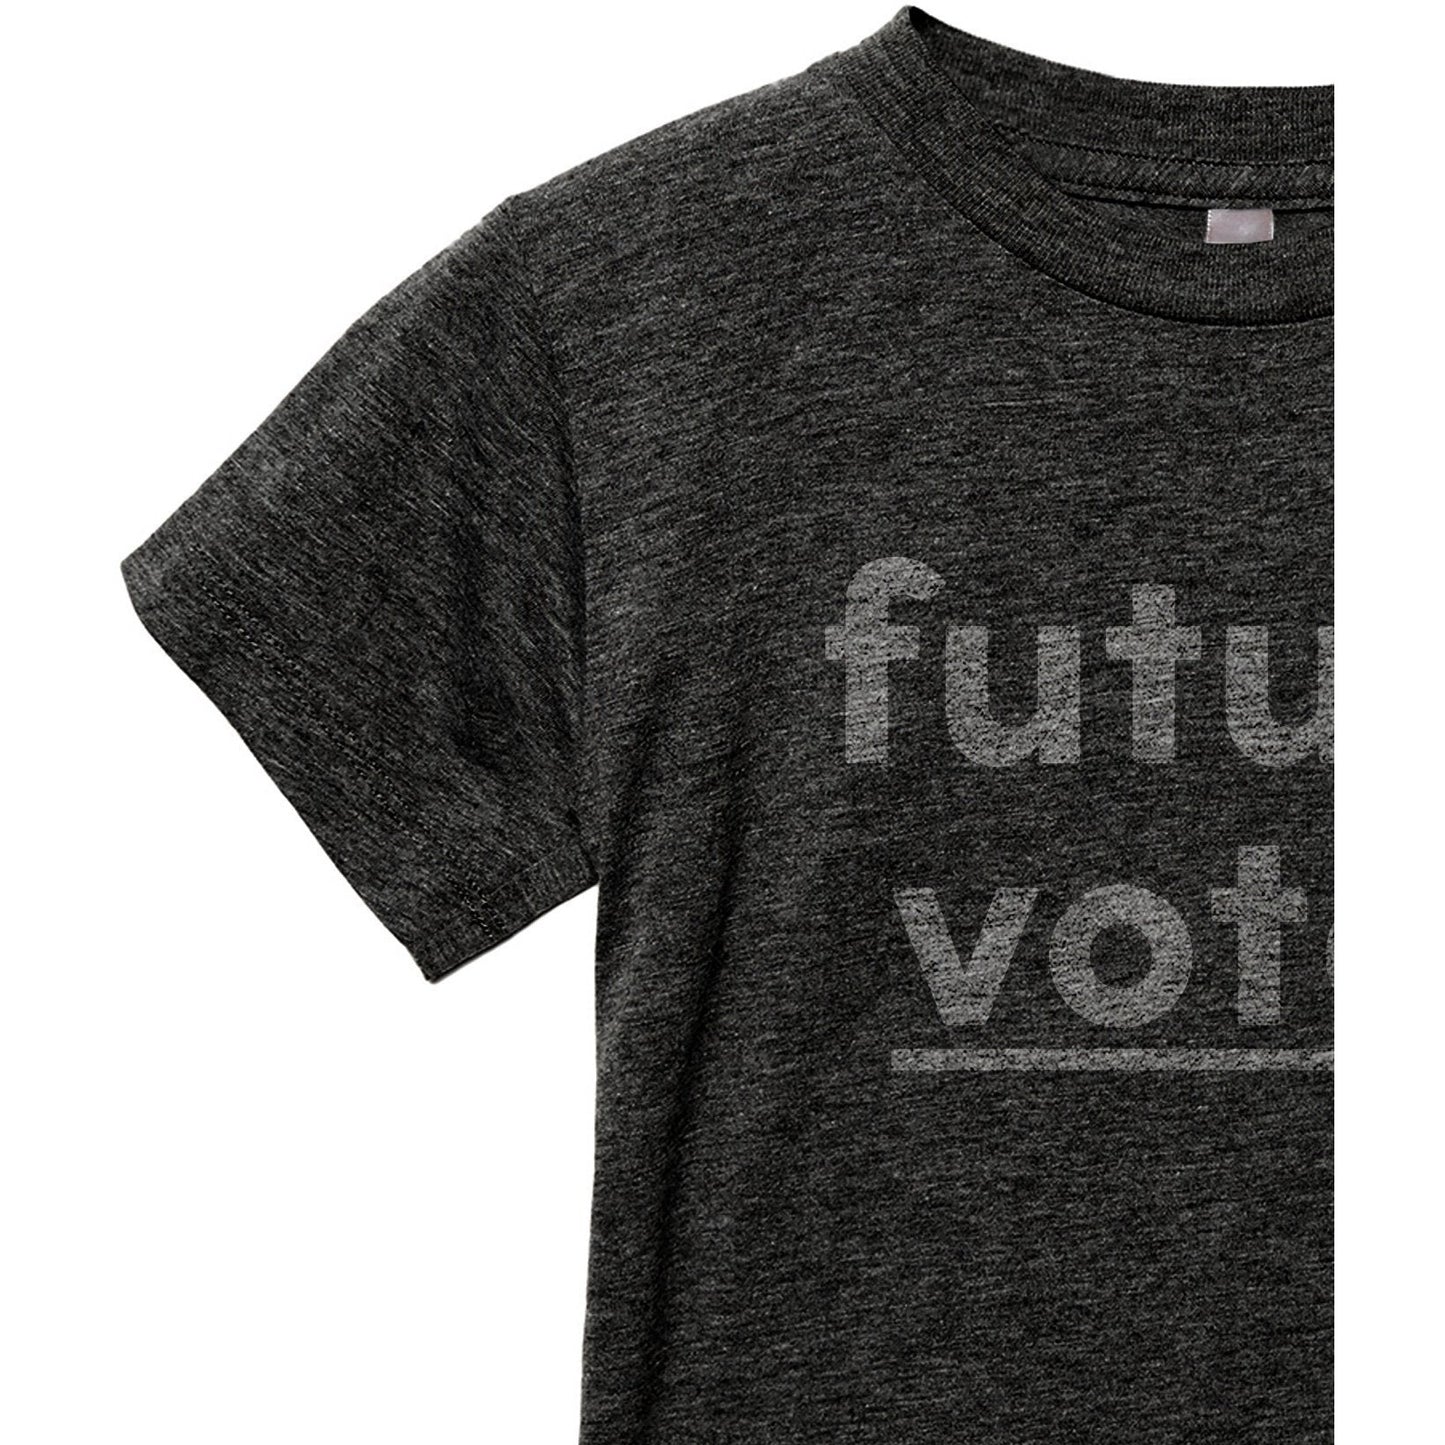 Future Voter Toddler's Go-To Crewneck Tee Charcoal Close Up Sleeves Collar Details
